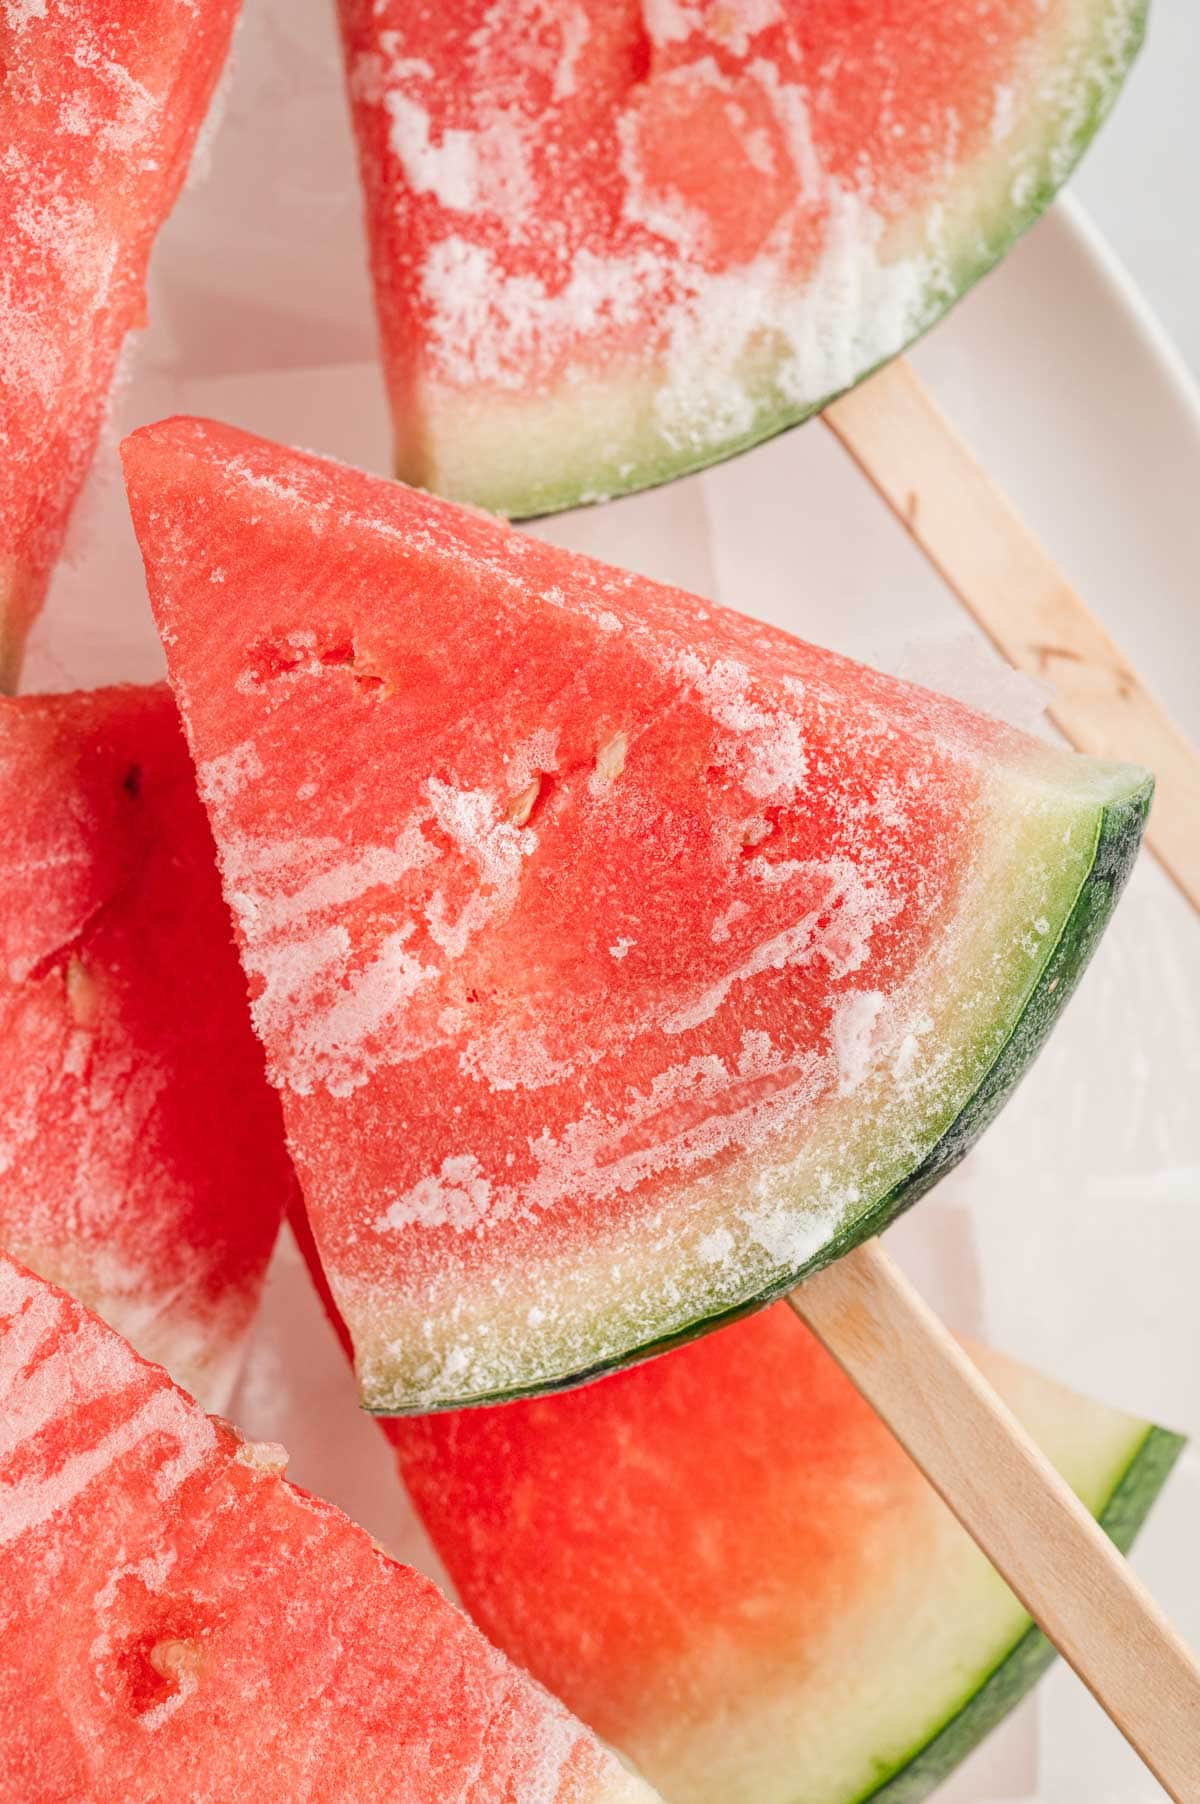 Slice of frozen watermelon with a popsicle stick.